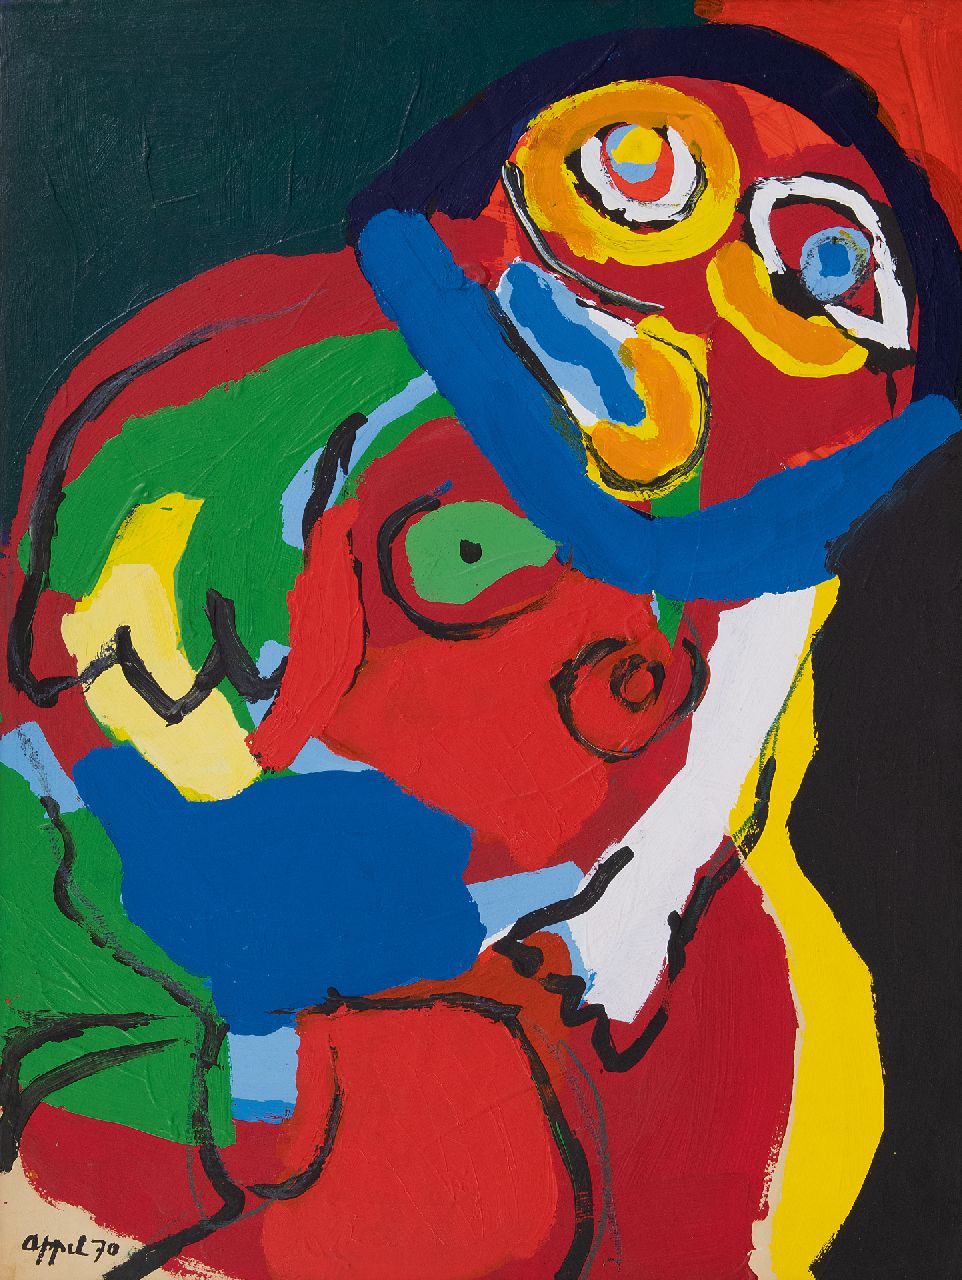 Appel C.K.  | Christiaan 'Karel' Appel | Paintings offered for sale | Toutes ces têtes, acrylic on paper 68.6 x 52.1 cm, signed l.l. and dated '70